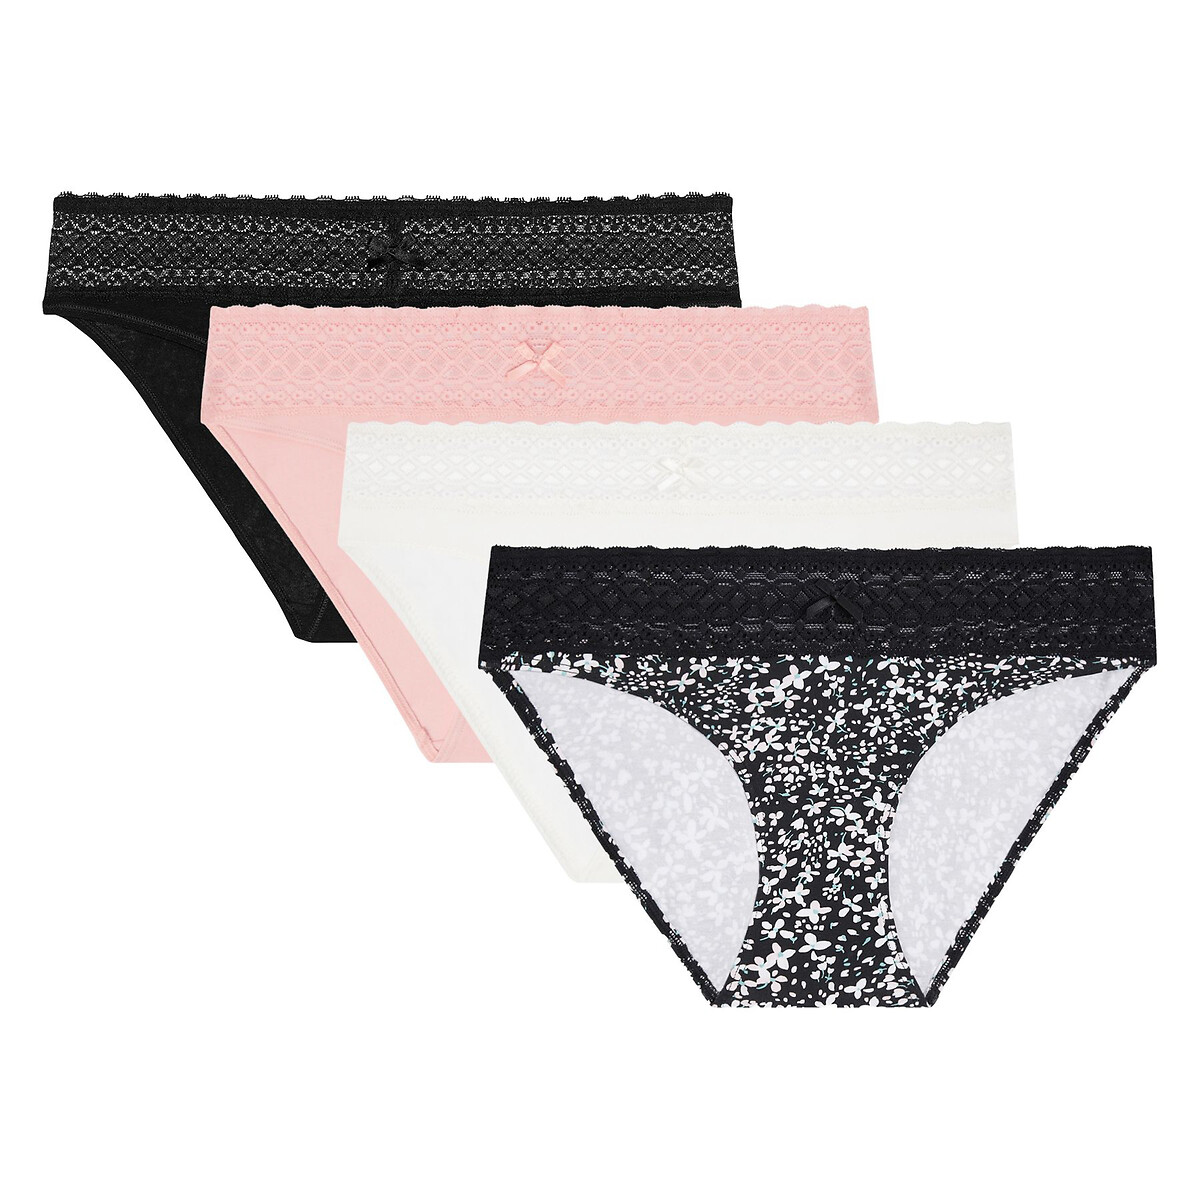 Pack of 4 Les Cotons Knickers in Organic Cotton Mix